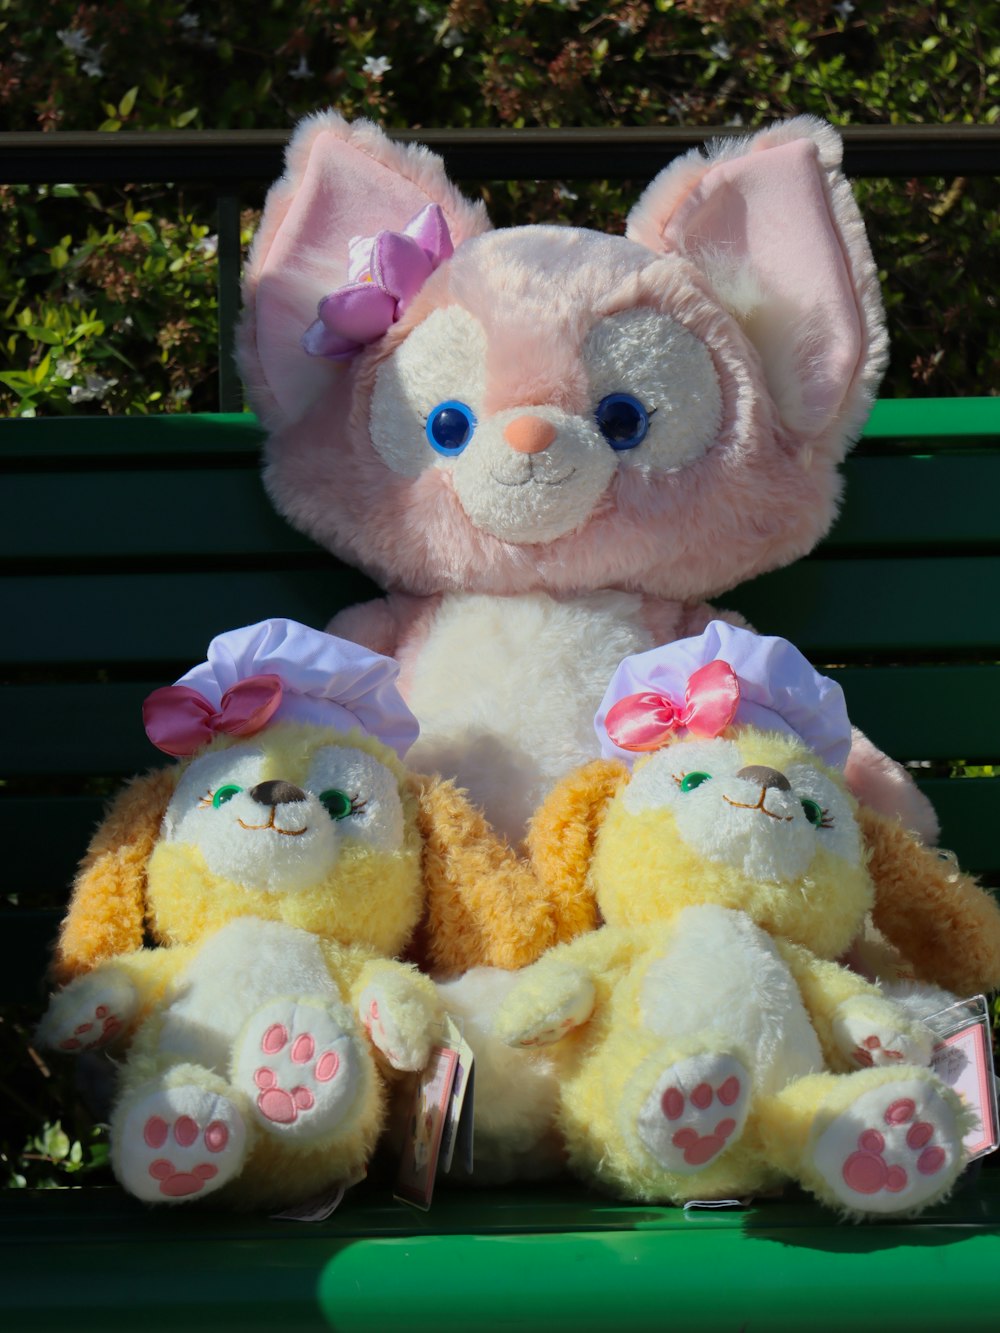 two stuffed animals sitting on a green bench